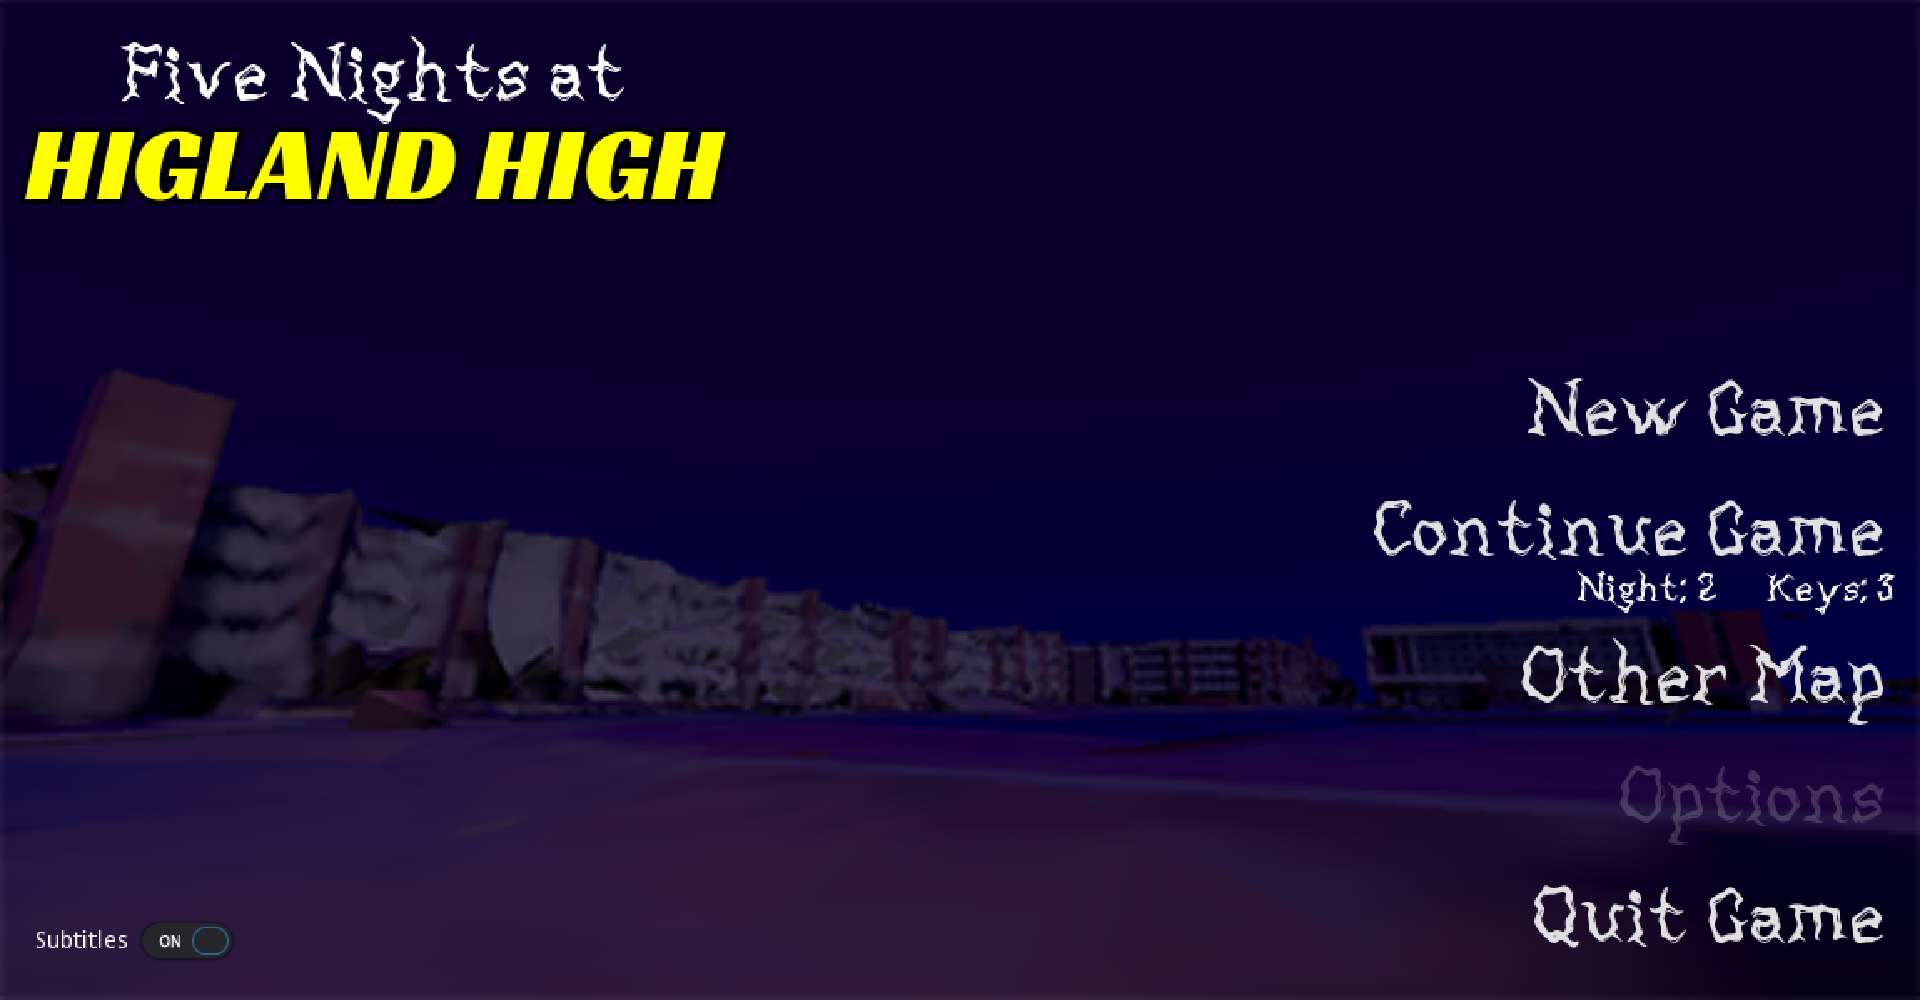 A title screen. The options are to Play, Continue, Alternate Map, and Quit. In the background is a low-poly building